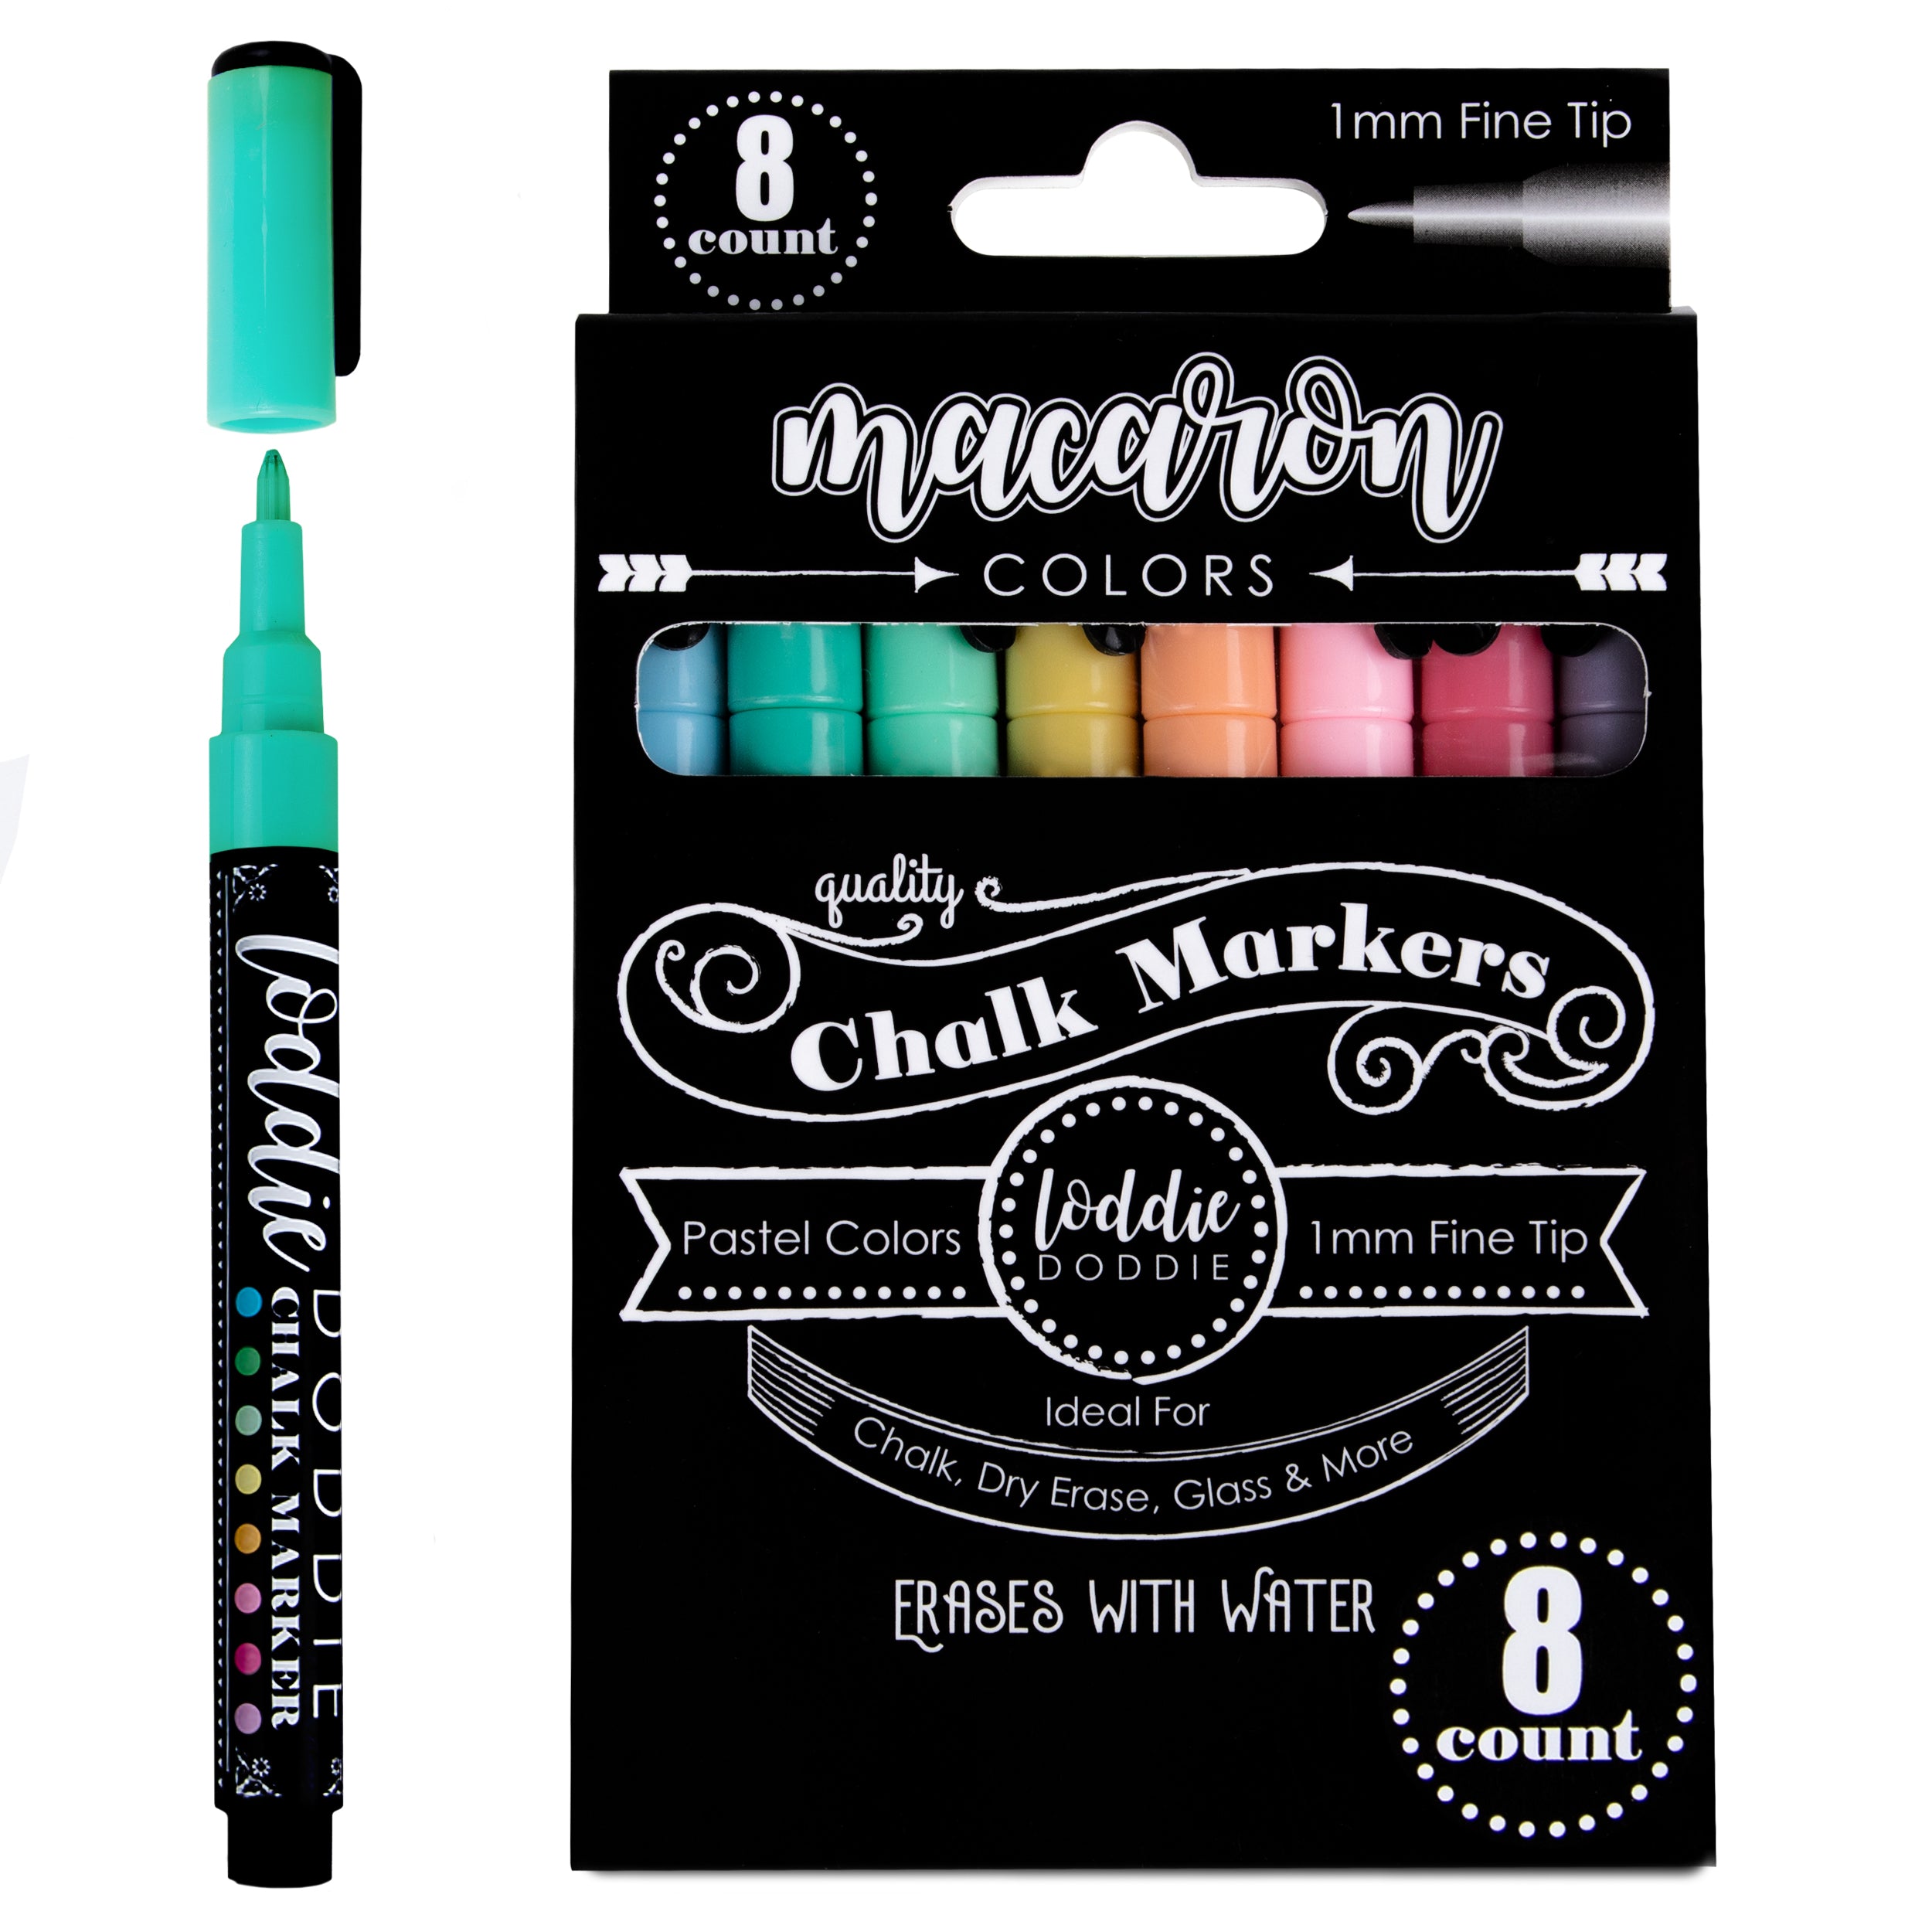 Loddie Doddie Liquid Chalk Markers for Chalkboard - 6mm Reversible Chisel  and Bullet Tips, Chalkboard Markers Erasable, Metallic Chalk Pens 8 Count :  Office Products 